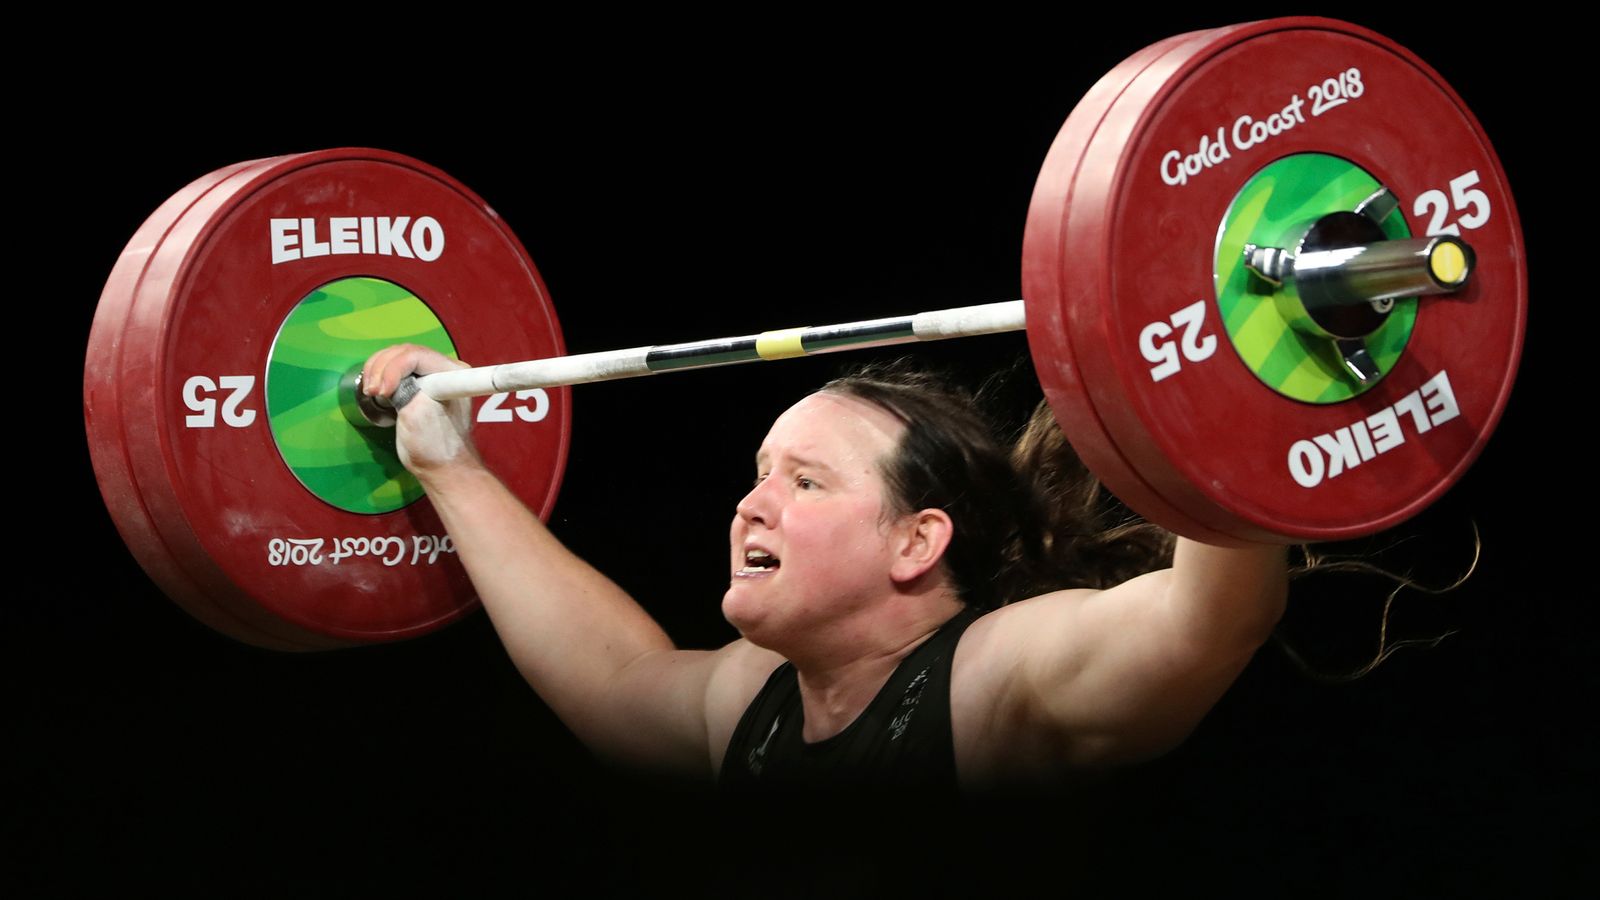 Trans Weightlifter Laurel Hubbard Set To Become First Transgender Olympic Athlete At Tokyo 2020